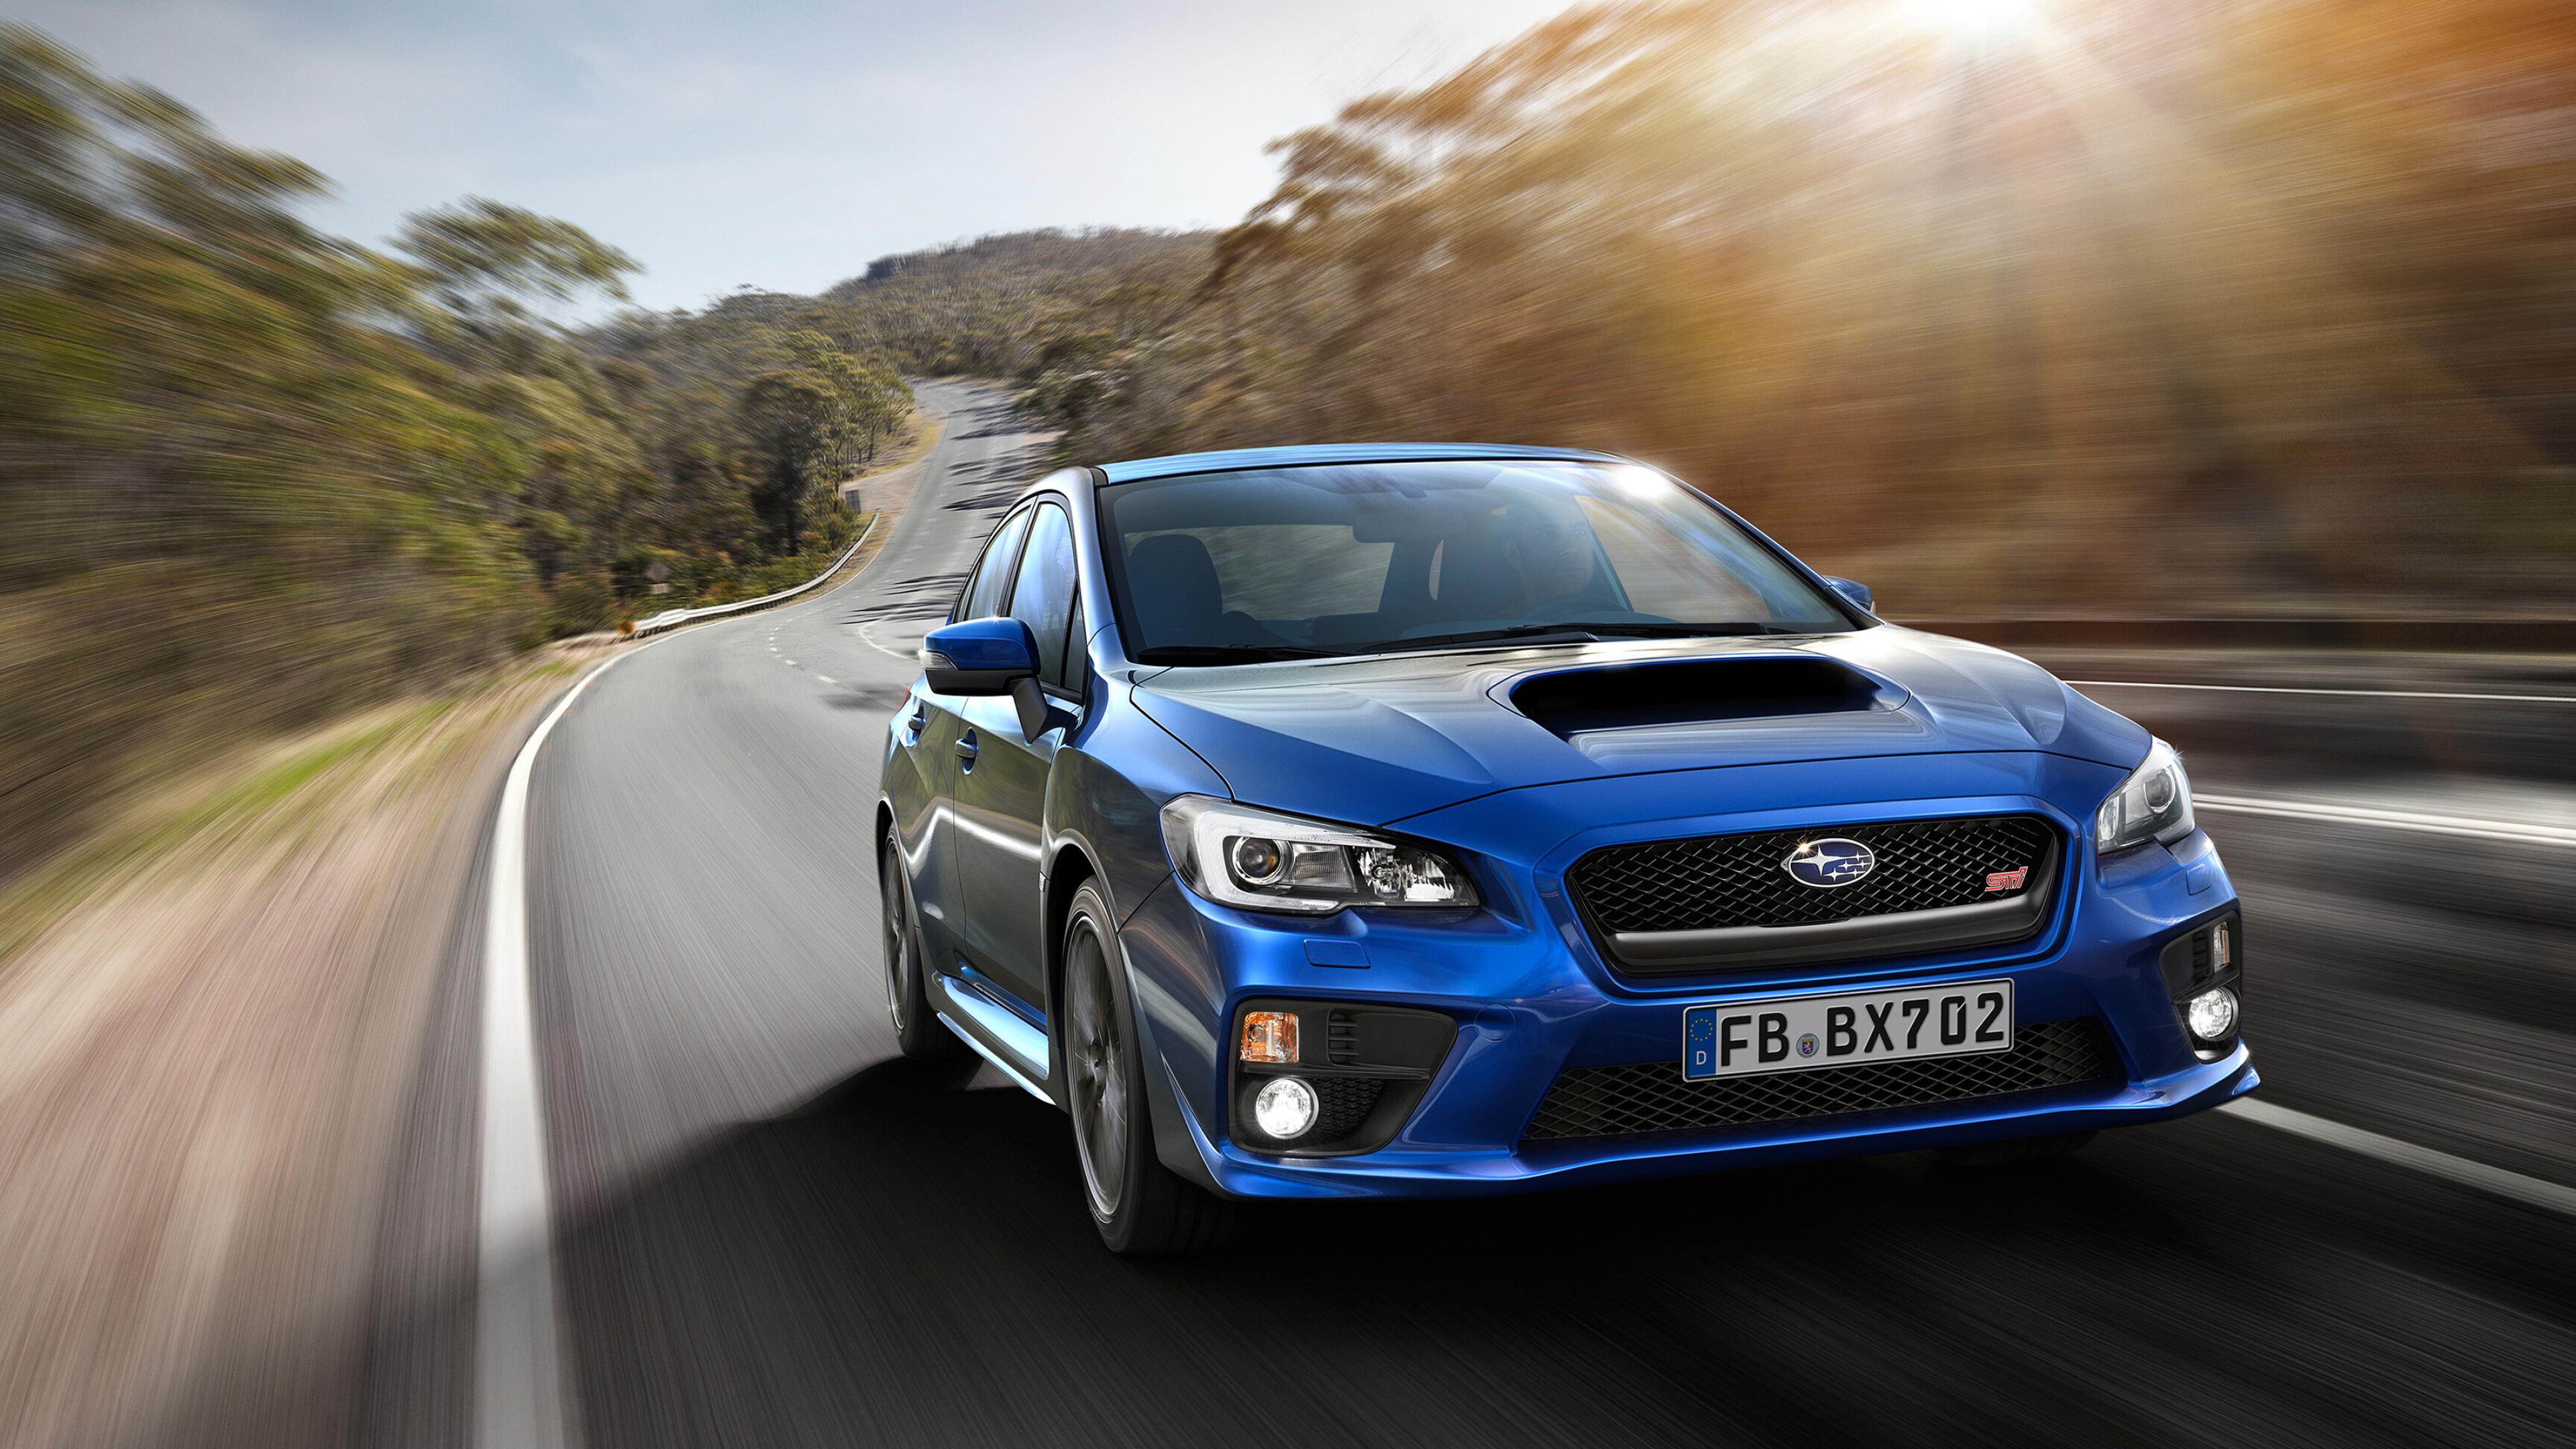 Subaru: Sports sedan, A 2.5-liter turbocharged horizontally opposed engine with 300 hp, Sports suspension, A manual 6-speed gearbox. 3840x2160 4K Background.